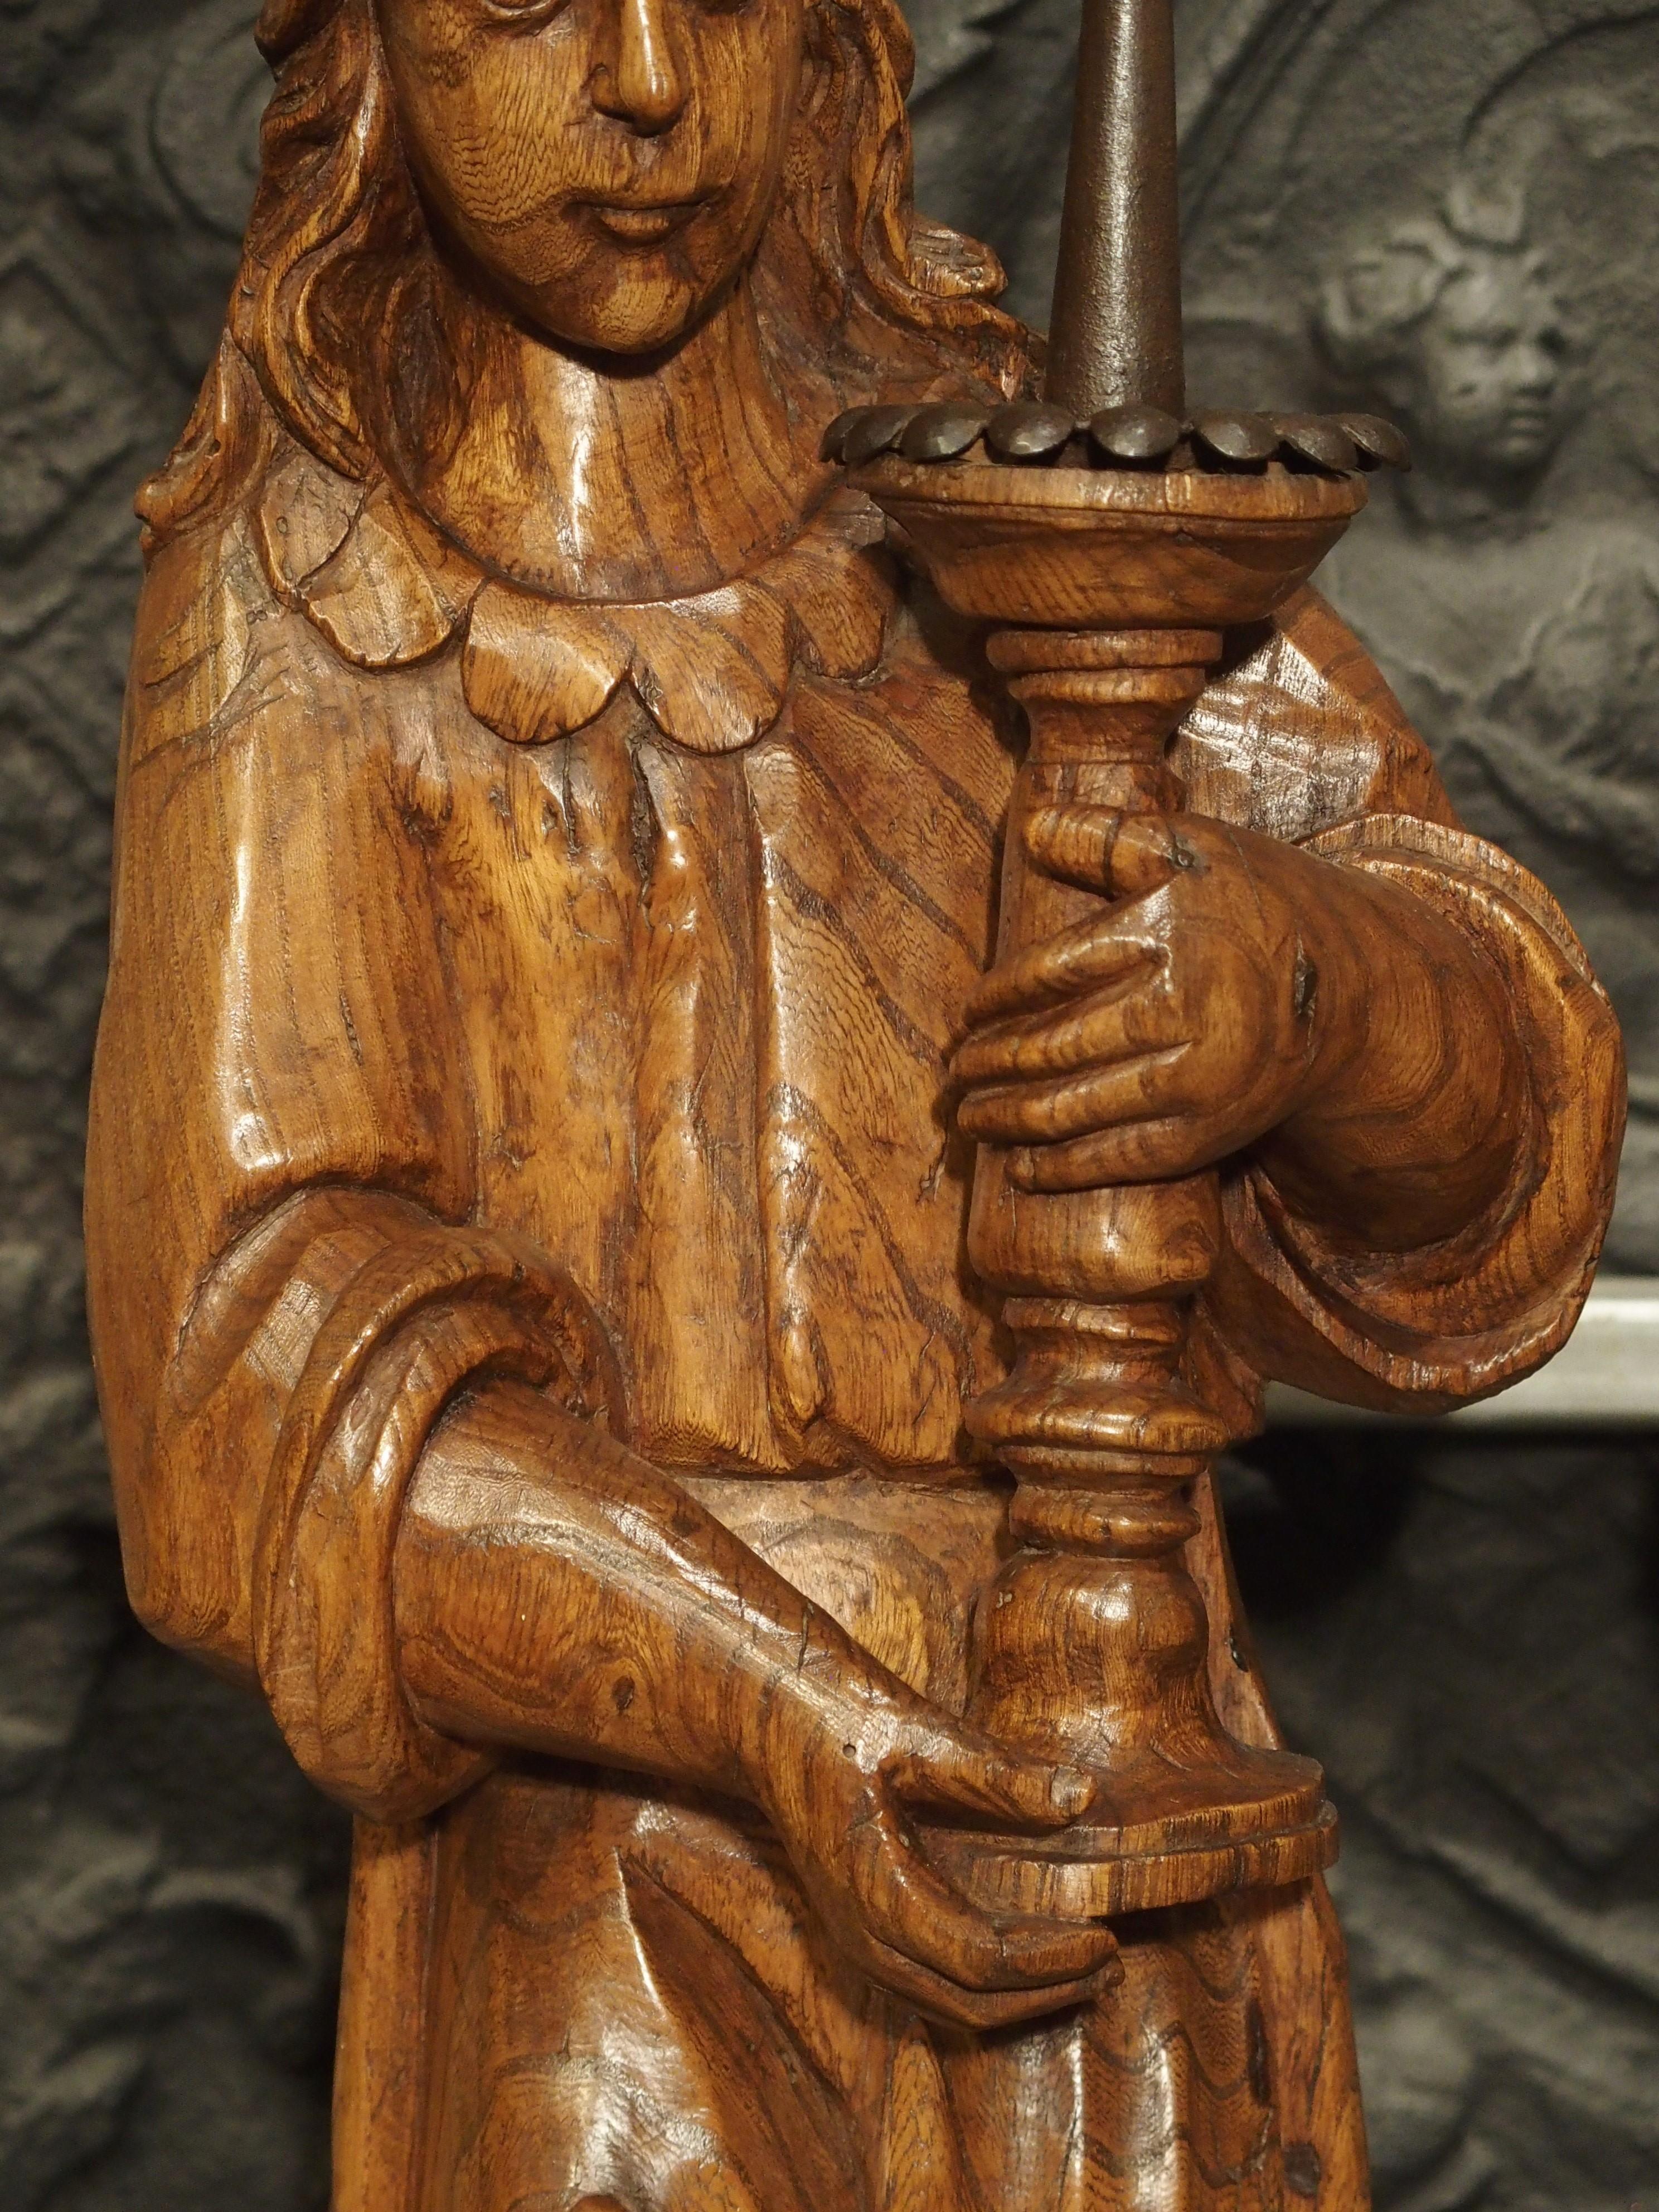 Standing at over two feet tall, this 17th century pair of angel candlesticks has been carved out of a beautiful French elm wood. Because elm wood typically has an interlocked grain, it can be quite difficult to carve or split. These candlesticks